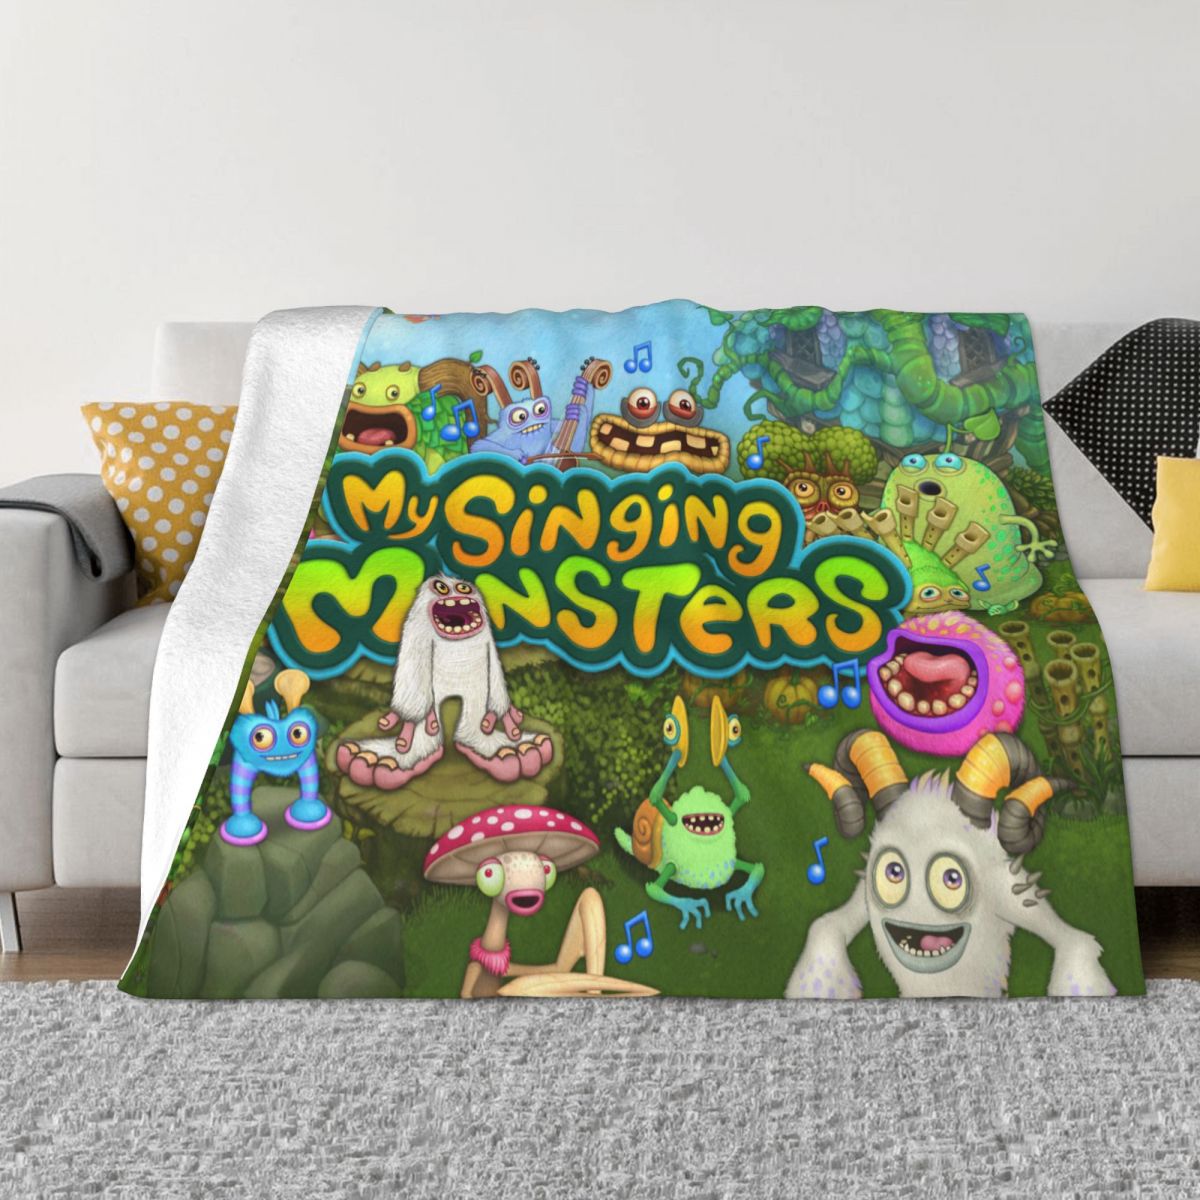 My Singing Monsters Blanket Game Cartoon Flannel Awesome Warm Throw Blanket for Bedspread Autumn Winter - My Singing Monsters Plush